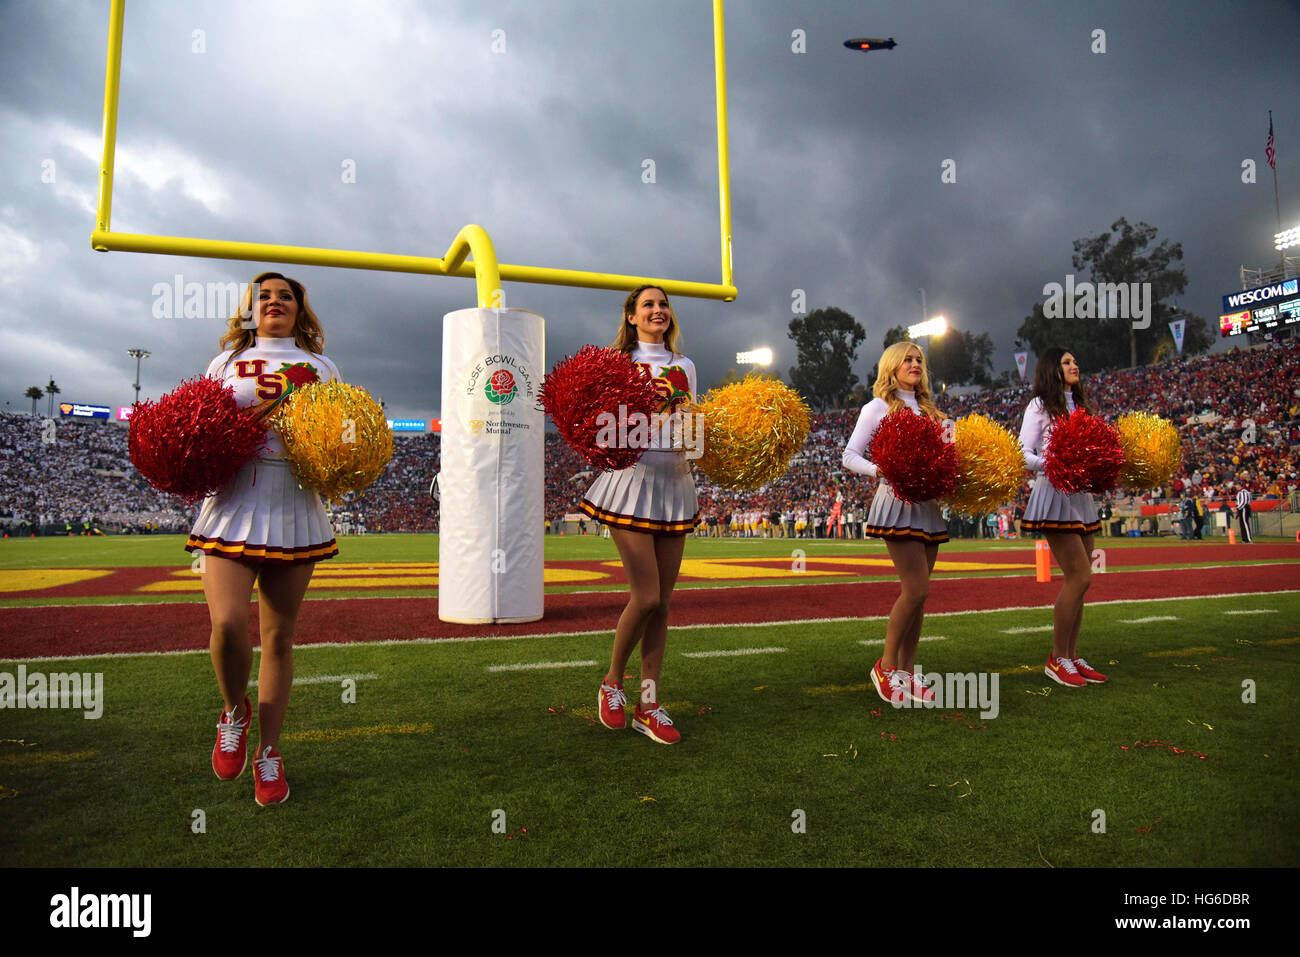 Pasadena, California, USA. 2nd Jan, 2017. Cheerleaders of the USC Trojans in action during a thrilling 52-49 victory over the Penn State Nittany Lions in the 103rd Rose Bowl game in Pasadena, Ca. © John Pyle/ZUMA Wire/Alamy Live News Stock Photo